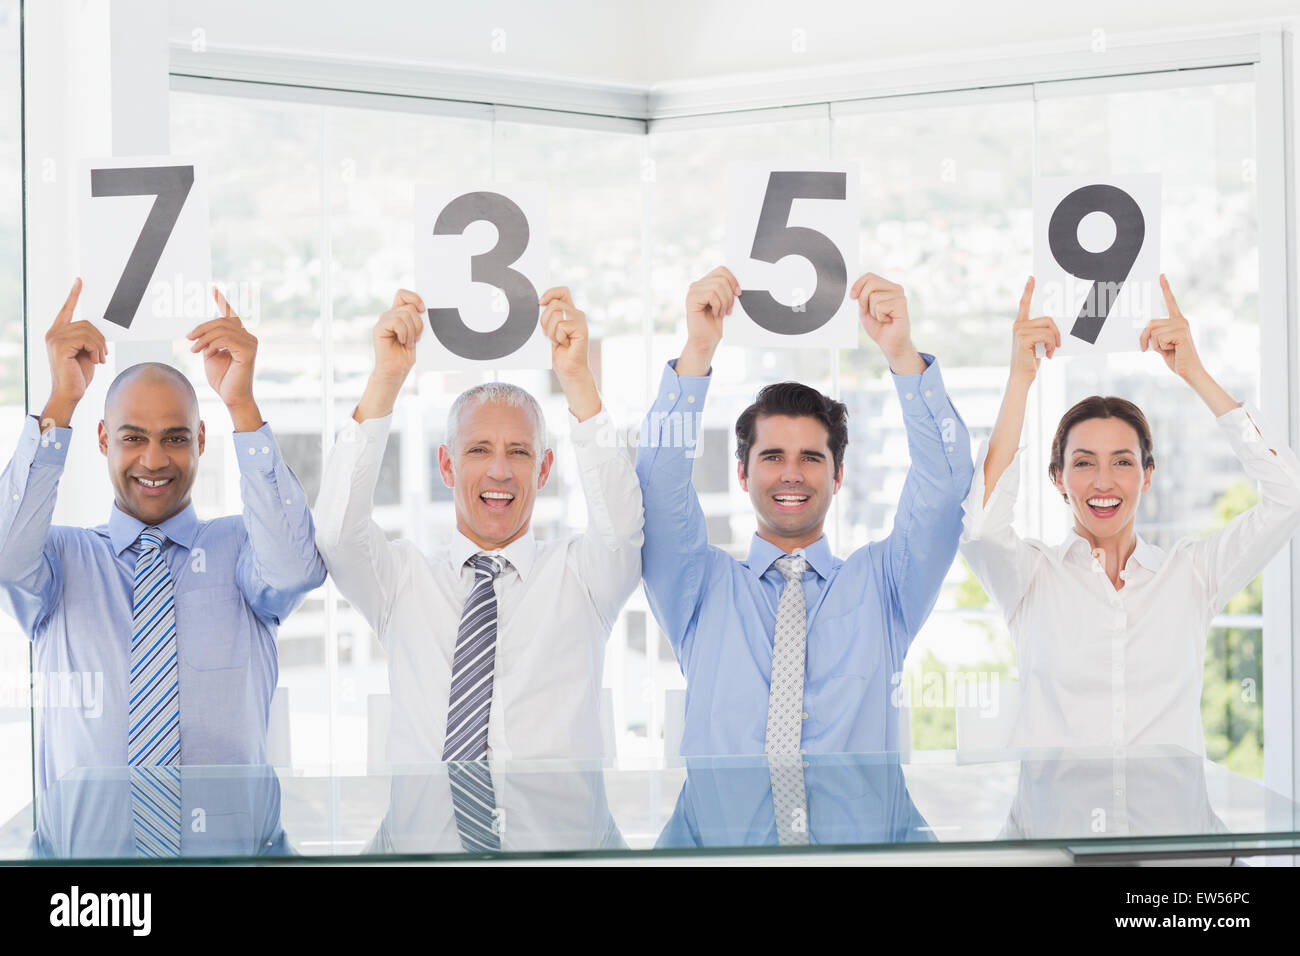 Smiling business team showing paper with rating Stock Photo